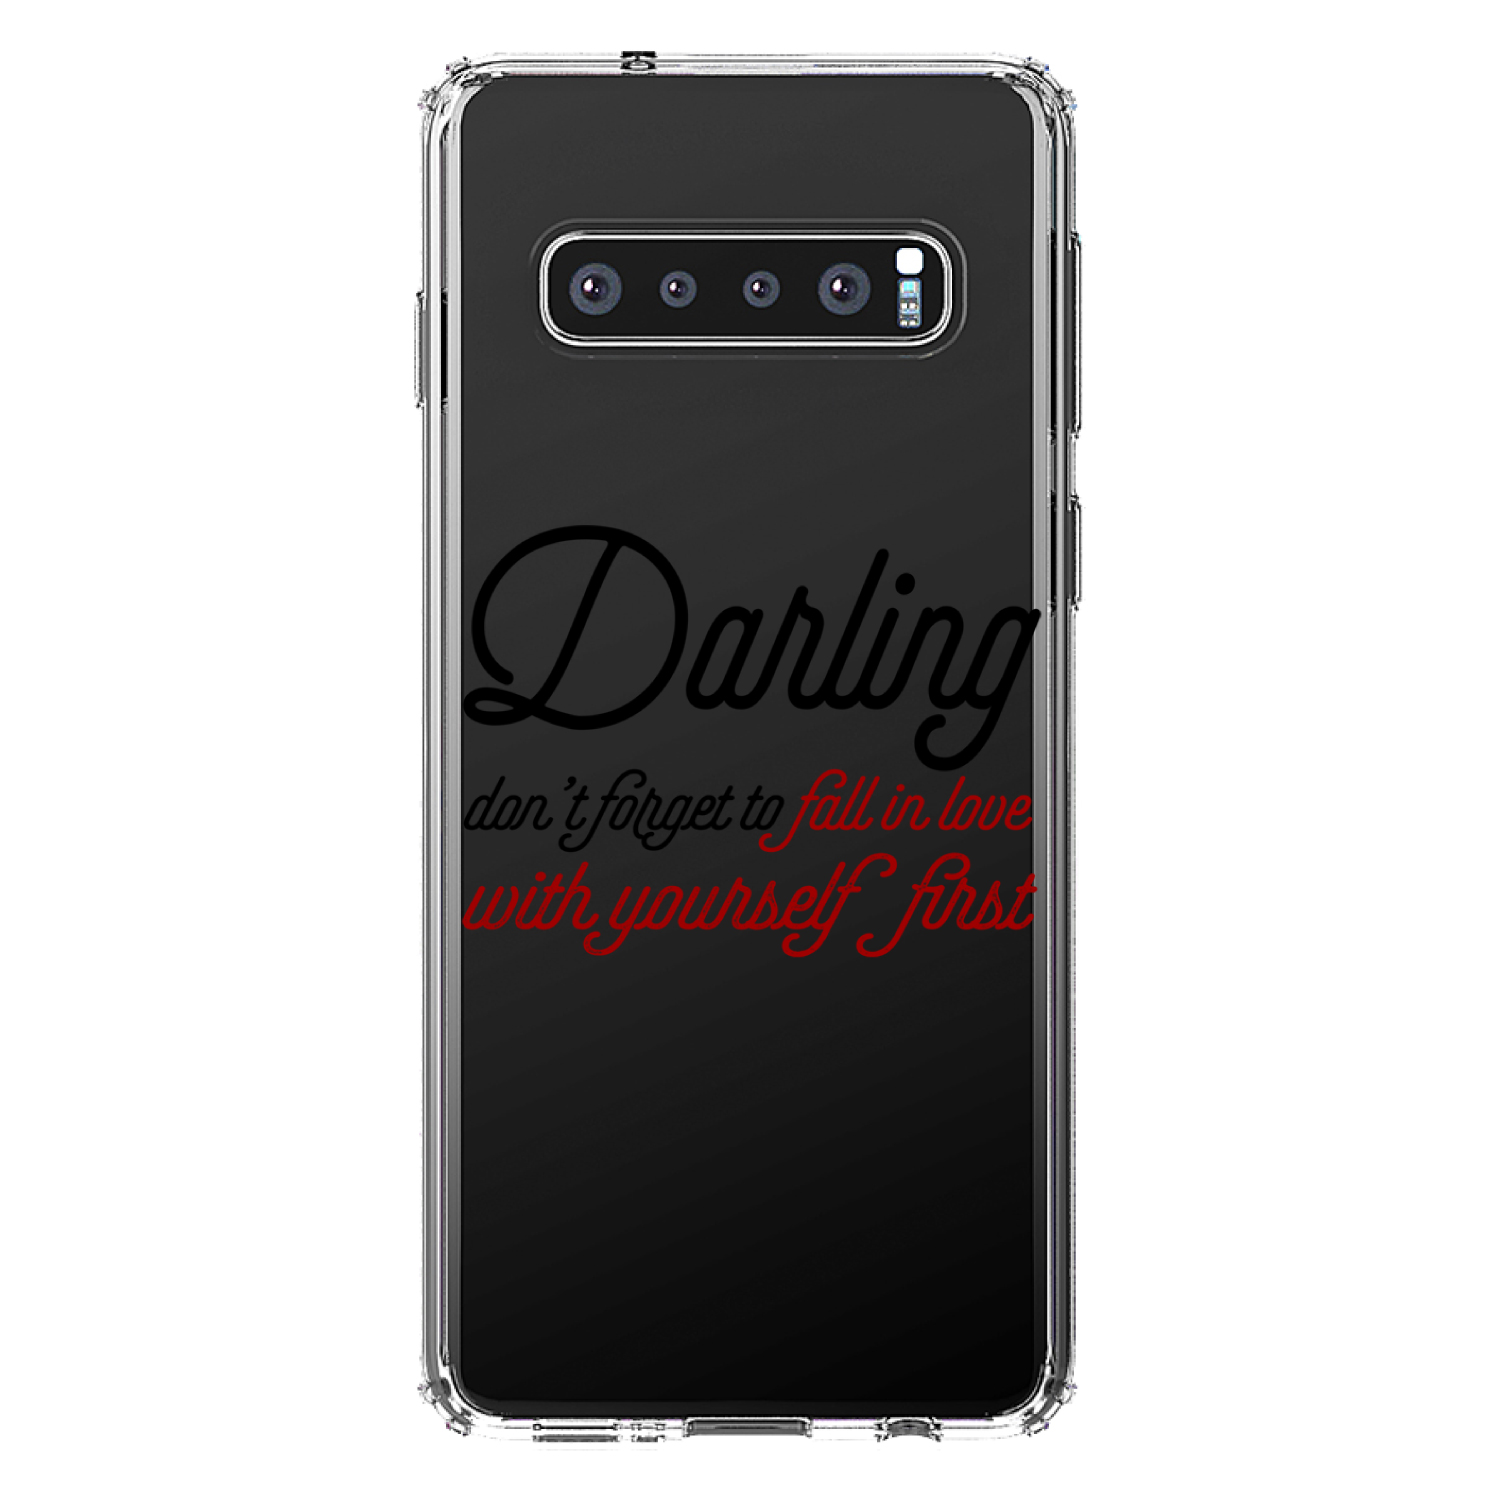 DistinctInk Clear Shockproof Hybrid Case for Samsung Galaxy S10+ PLUS (6.4" Screen) - TPU Bumper Acrylic Back Tempered Glass Screen Protector - Darling Don't Forget to Fall In Love with Yourself - image 1 of 2